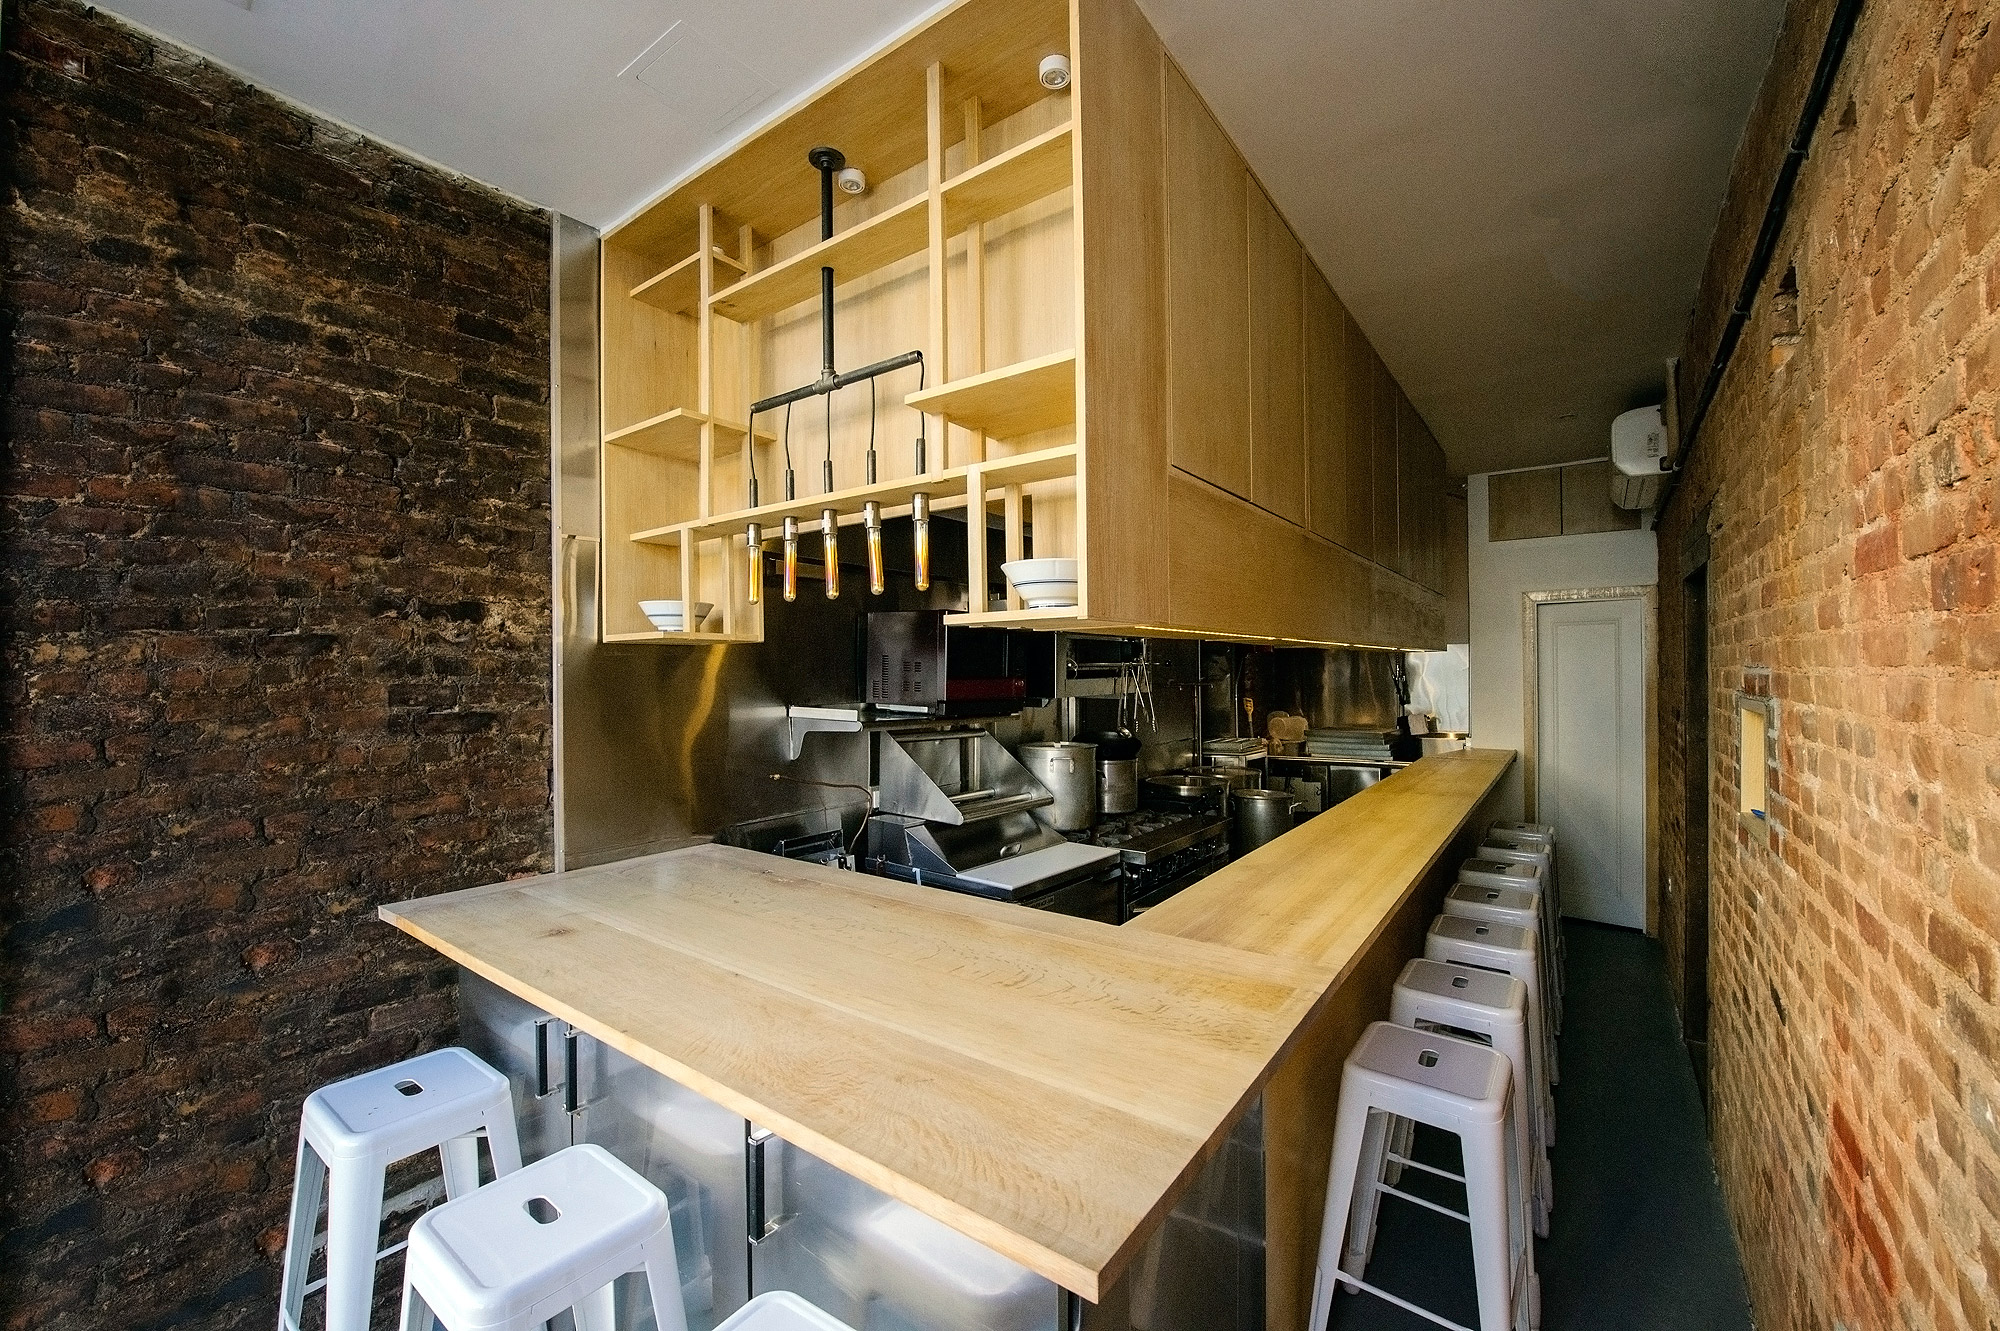 The interior of a snug ramen shop, with ten stools pulled up to a light wood counter. An open-air kitchen is visible in the background.